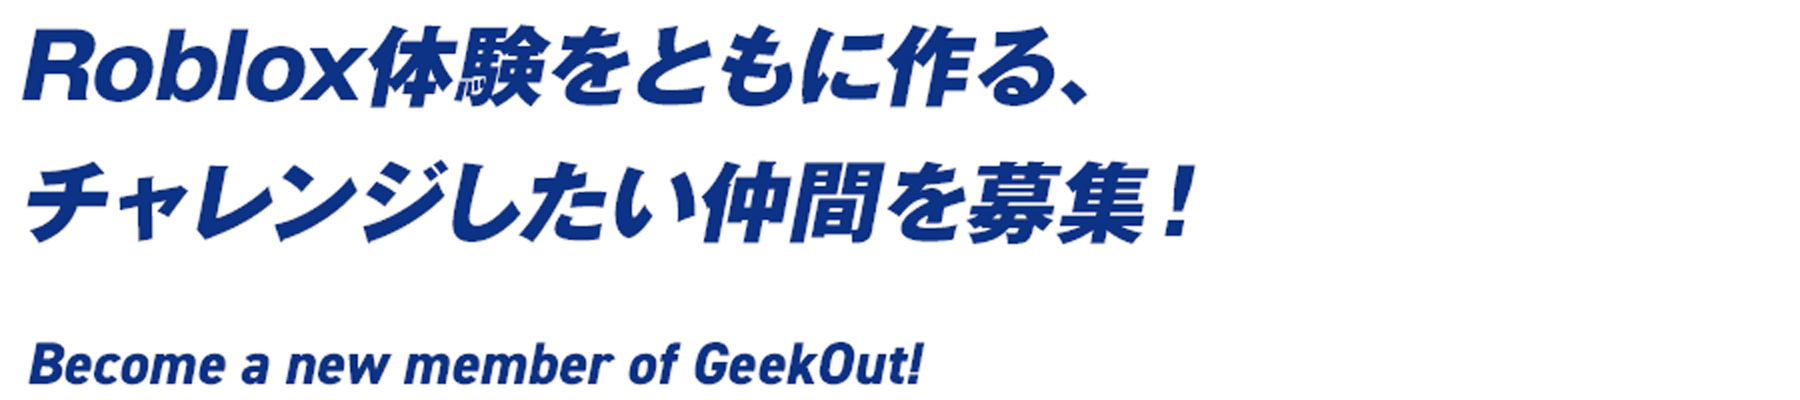 Roblox体験をともに作る、チャレンジしたい仲間を募集！Become a new member of GeekOut!